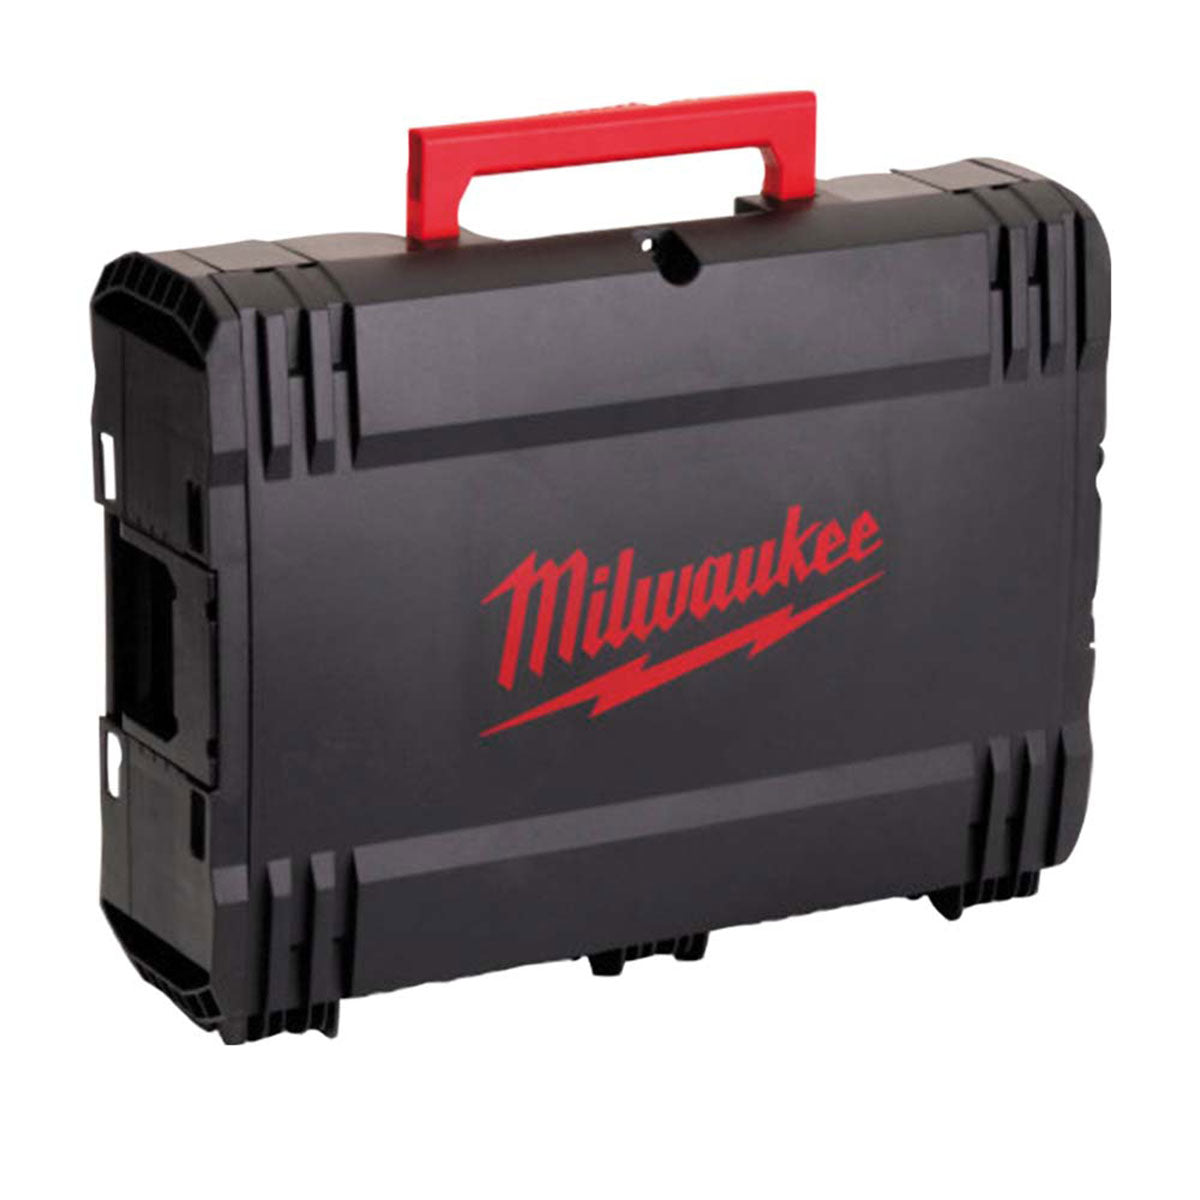 Milwaukee 18V M18 ONEFHPX-0X Fuel Brushless SDS Plus Hammer Drill with 1 x 5.0Ah Battery & Charger